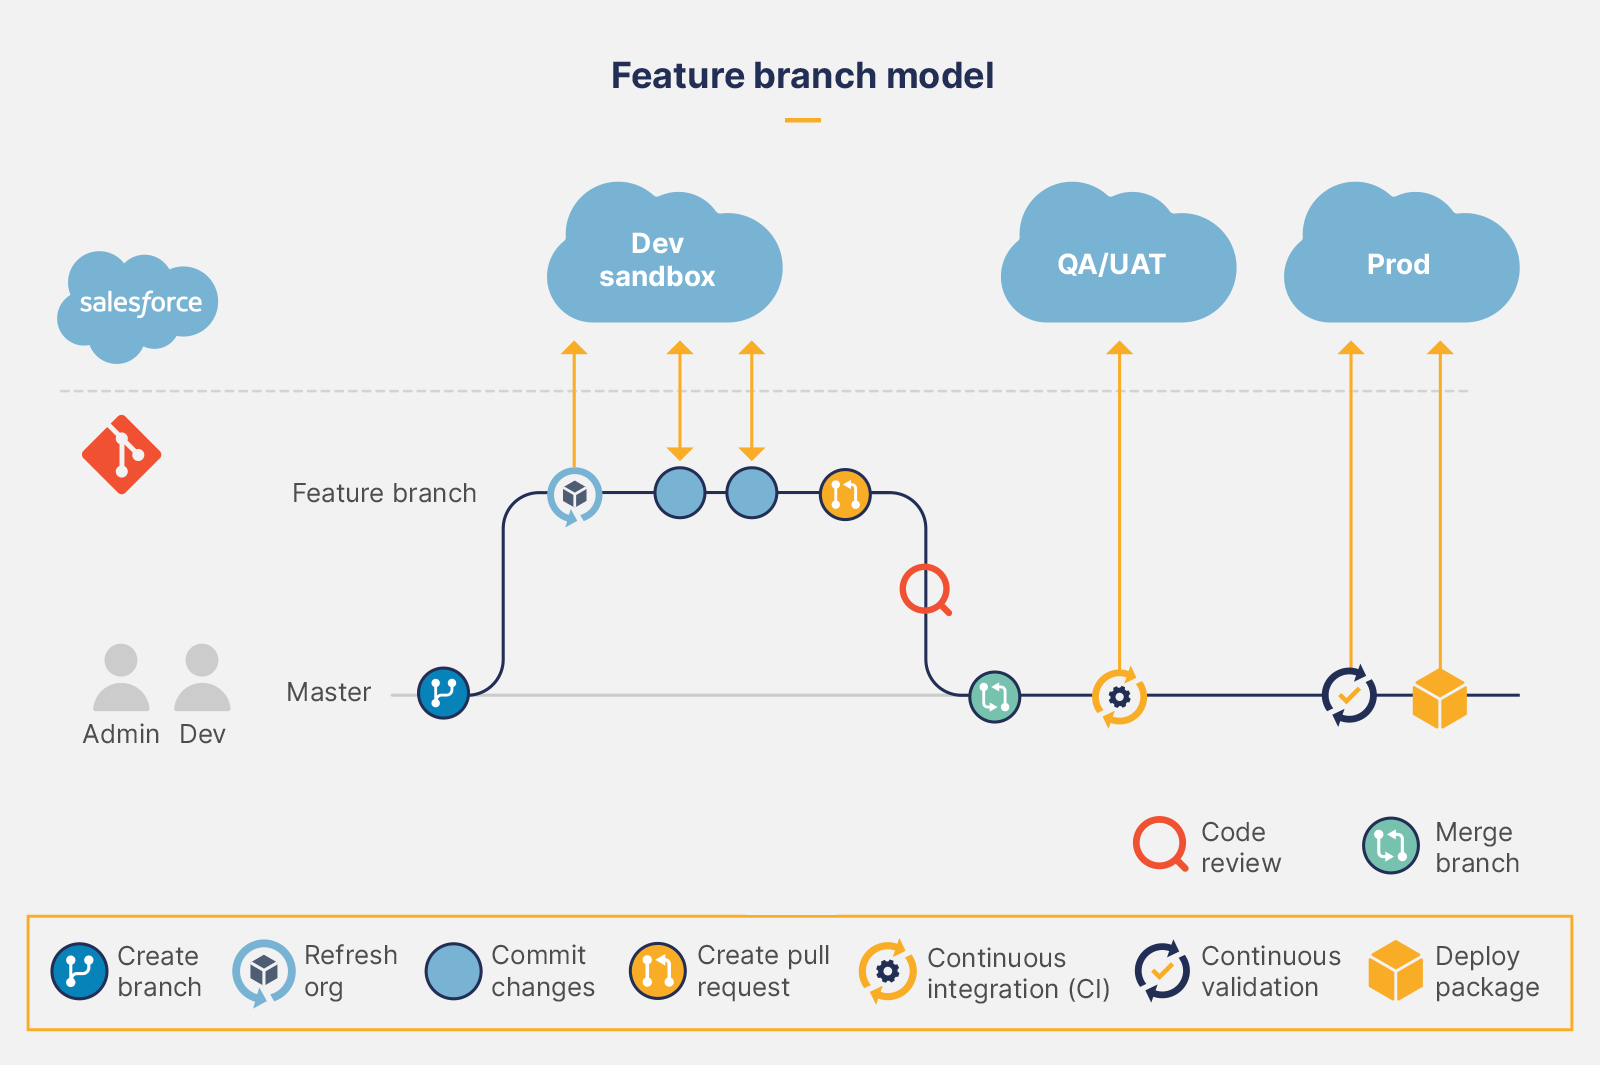 Feature branch model